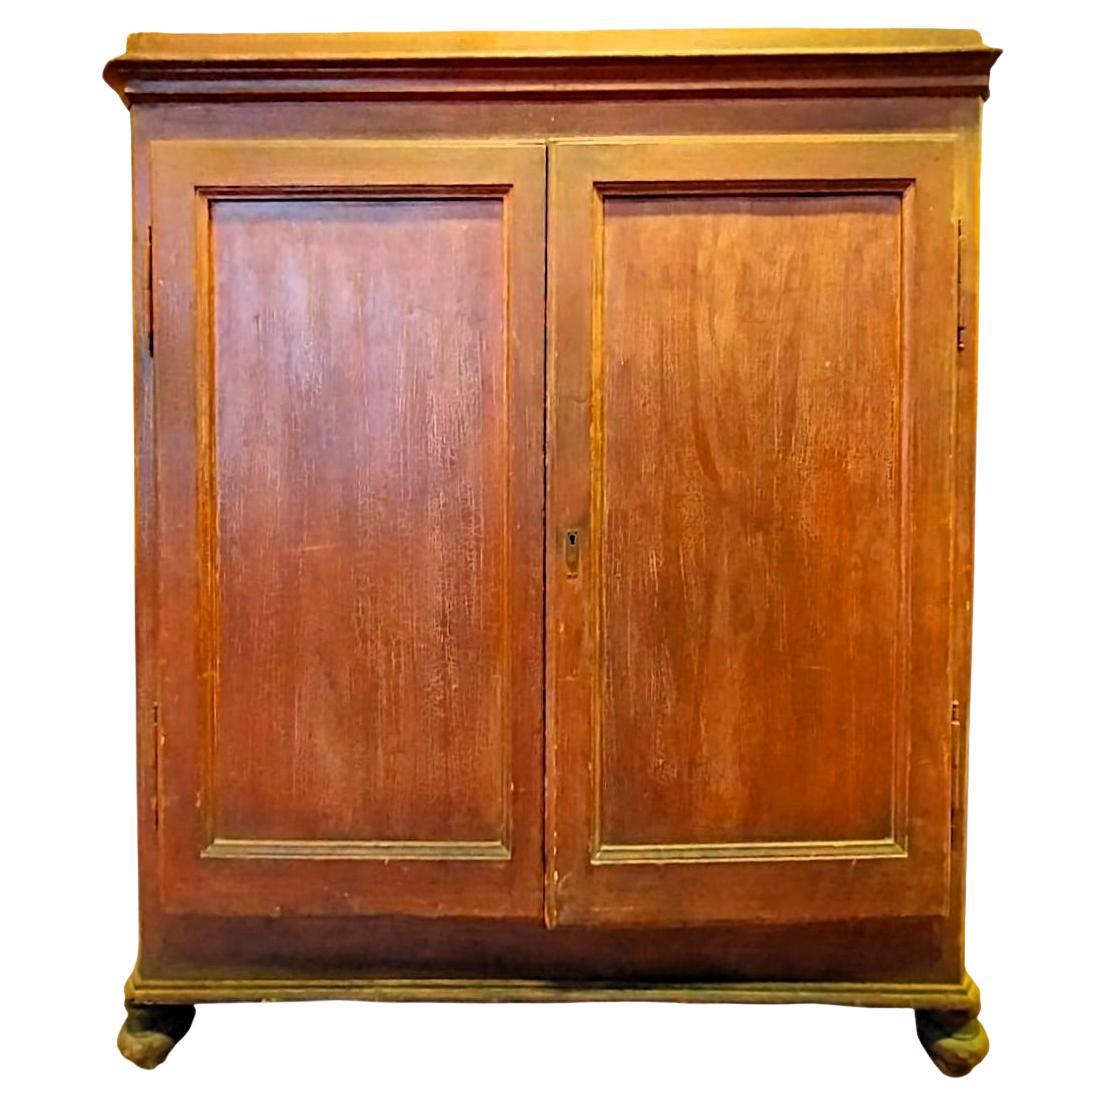 Spruce sideboard from the late 1800s with sliding interior shelves For Sale